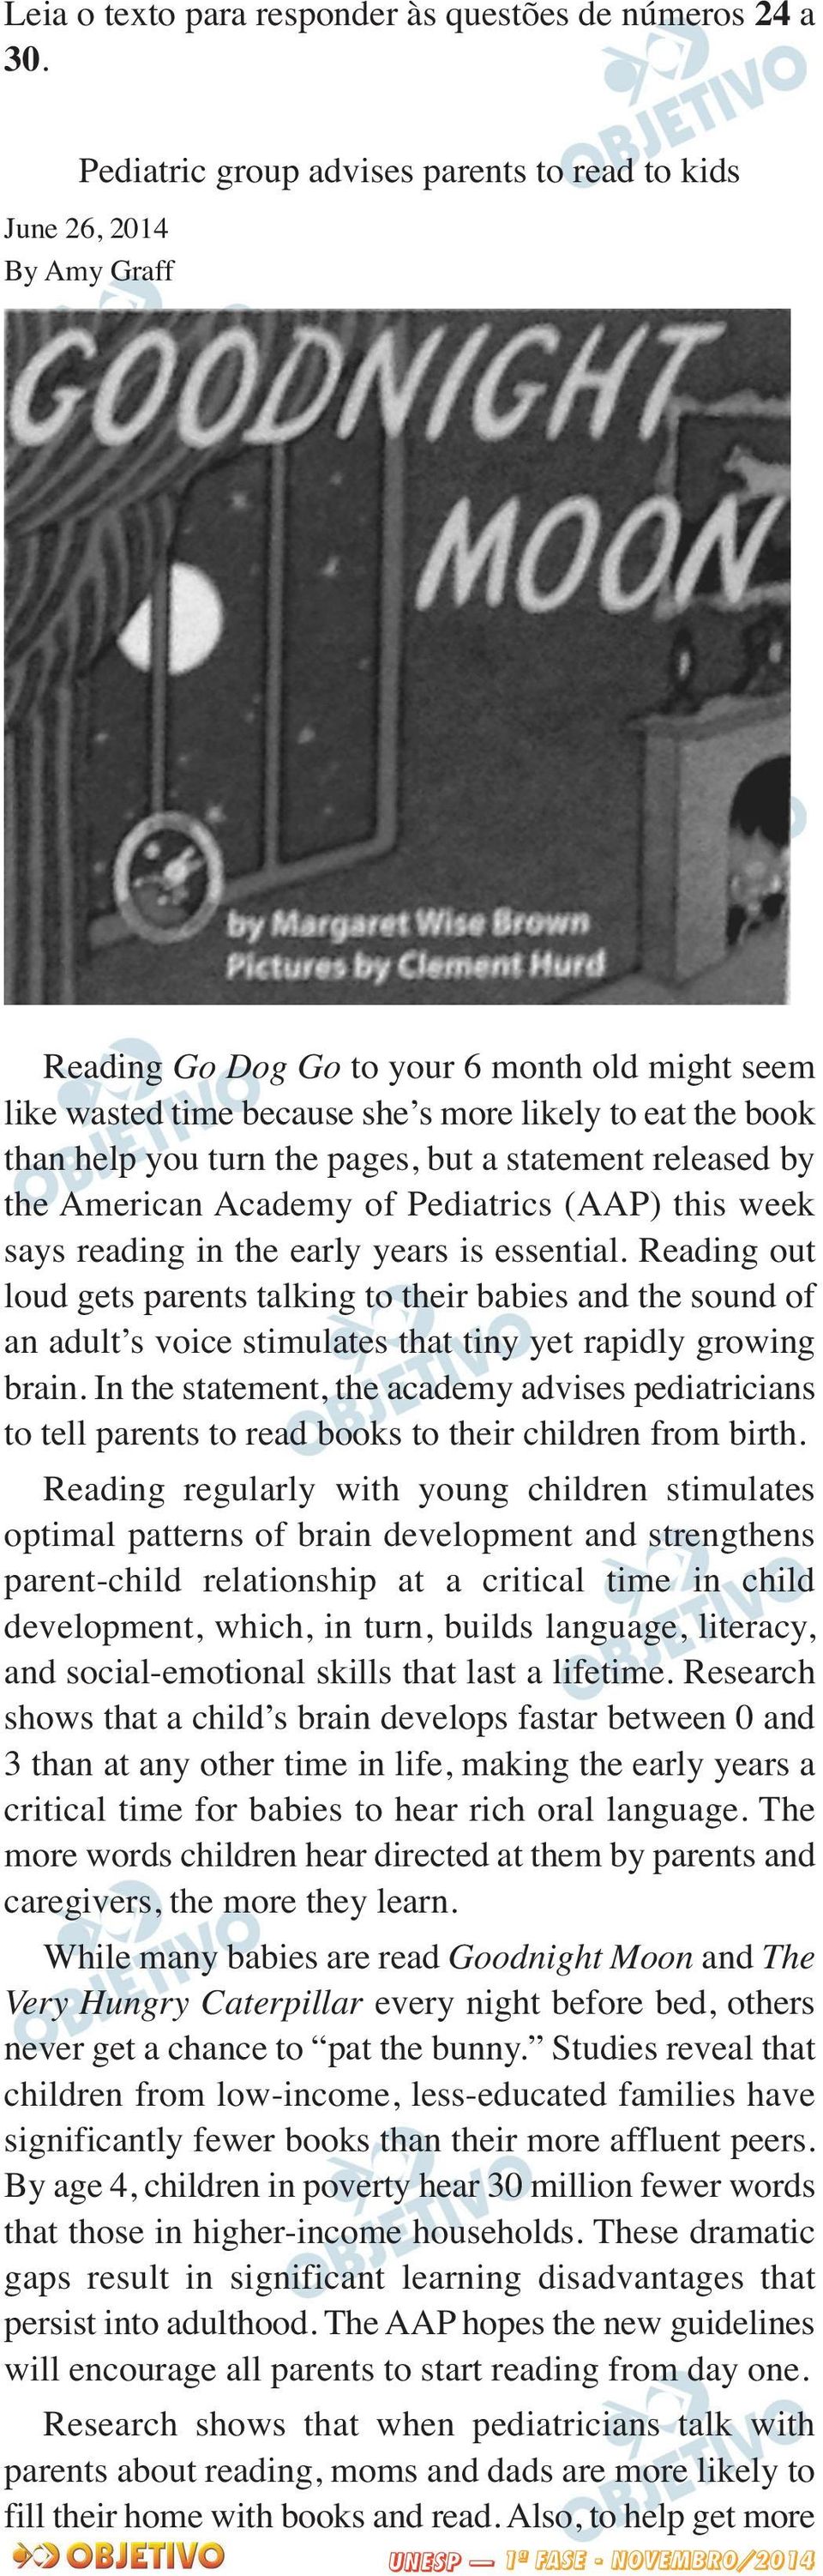 turn the pages, but a statement released by the American Academy of Pediatrics (AAP) this week says reading in the early years is essential.